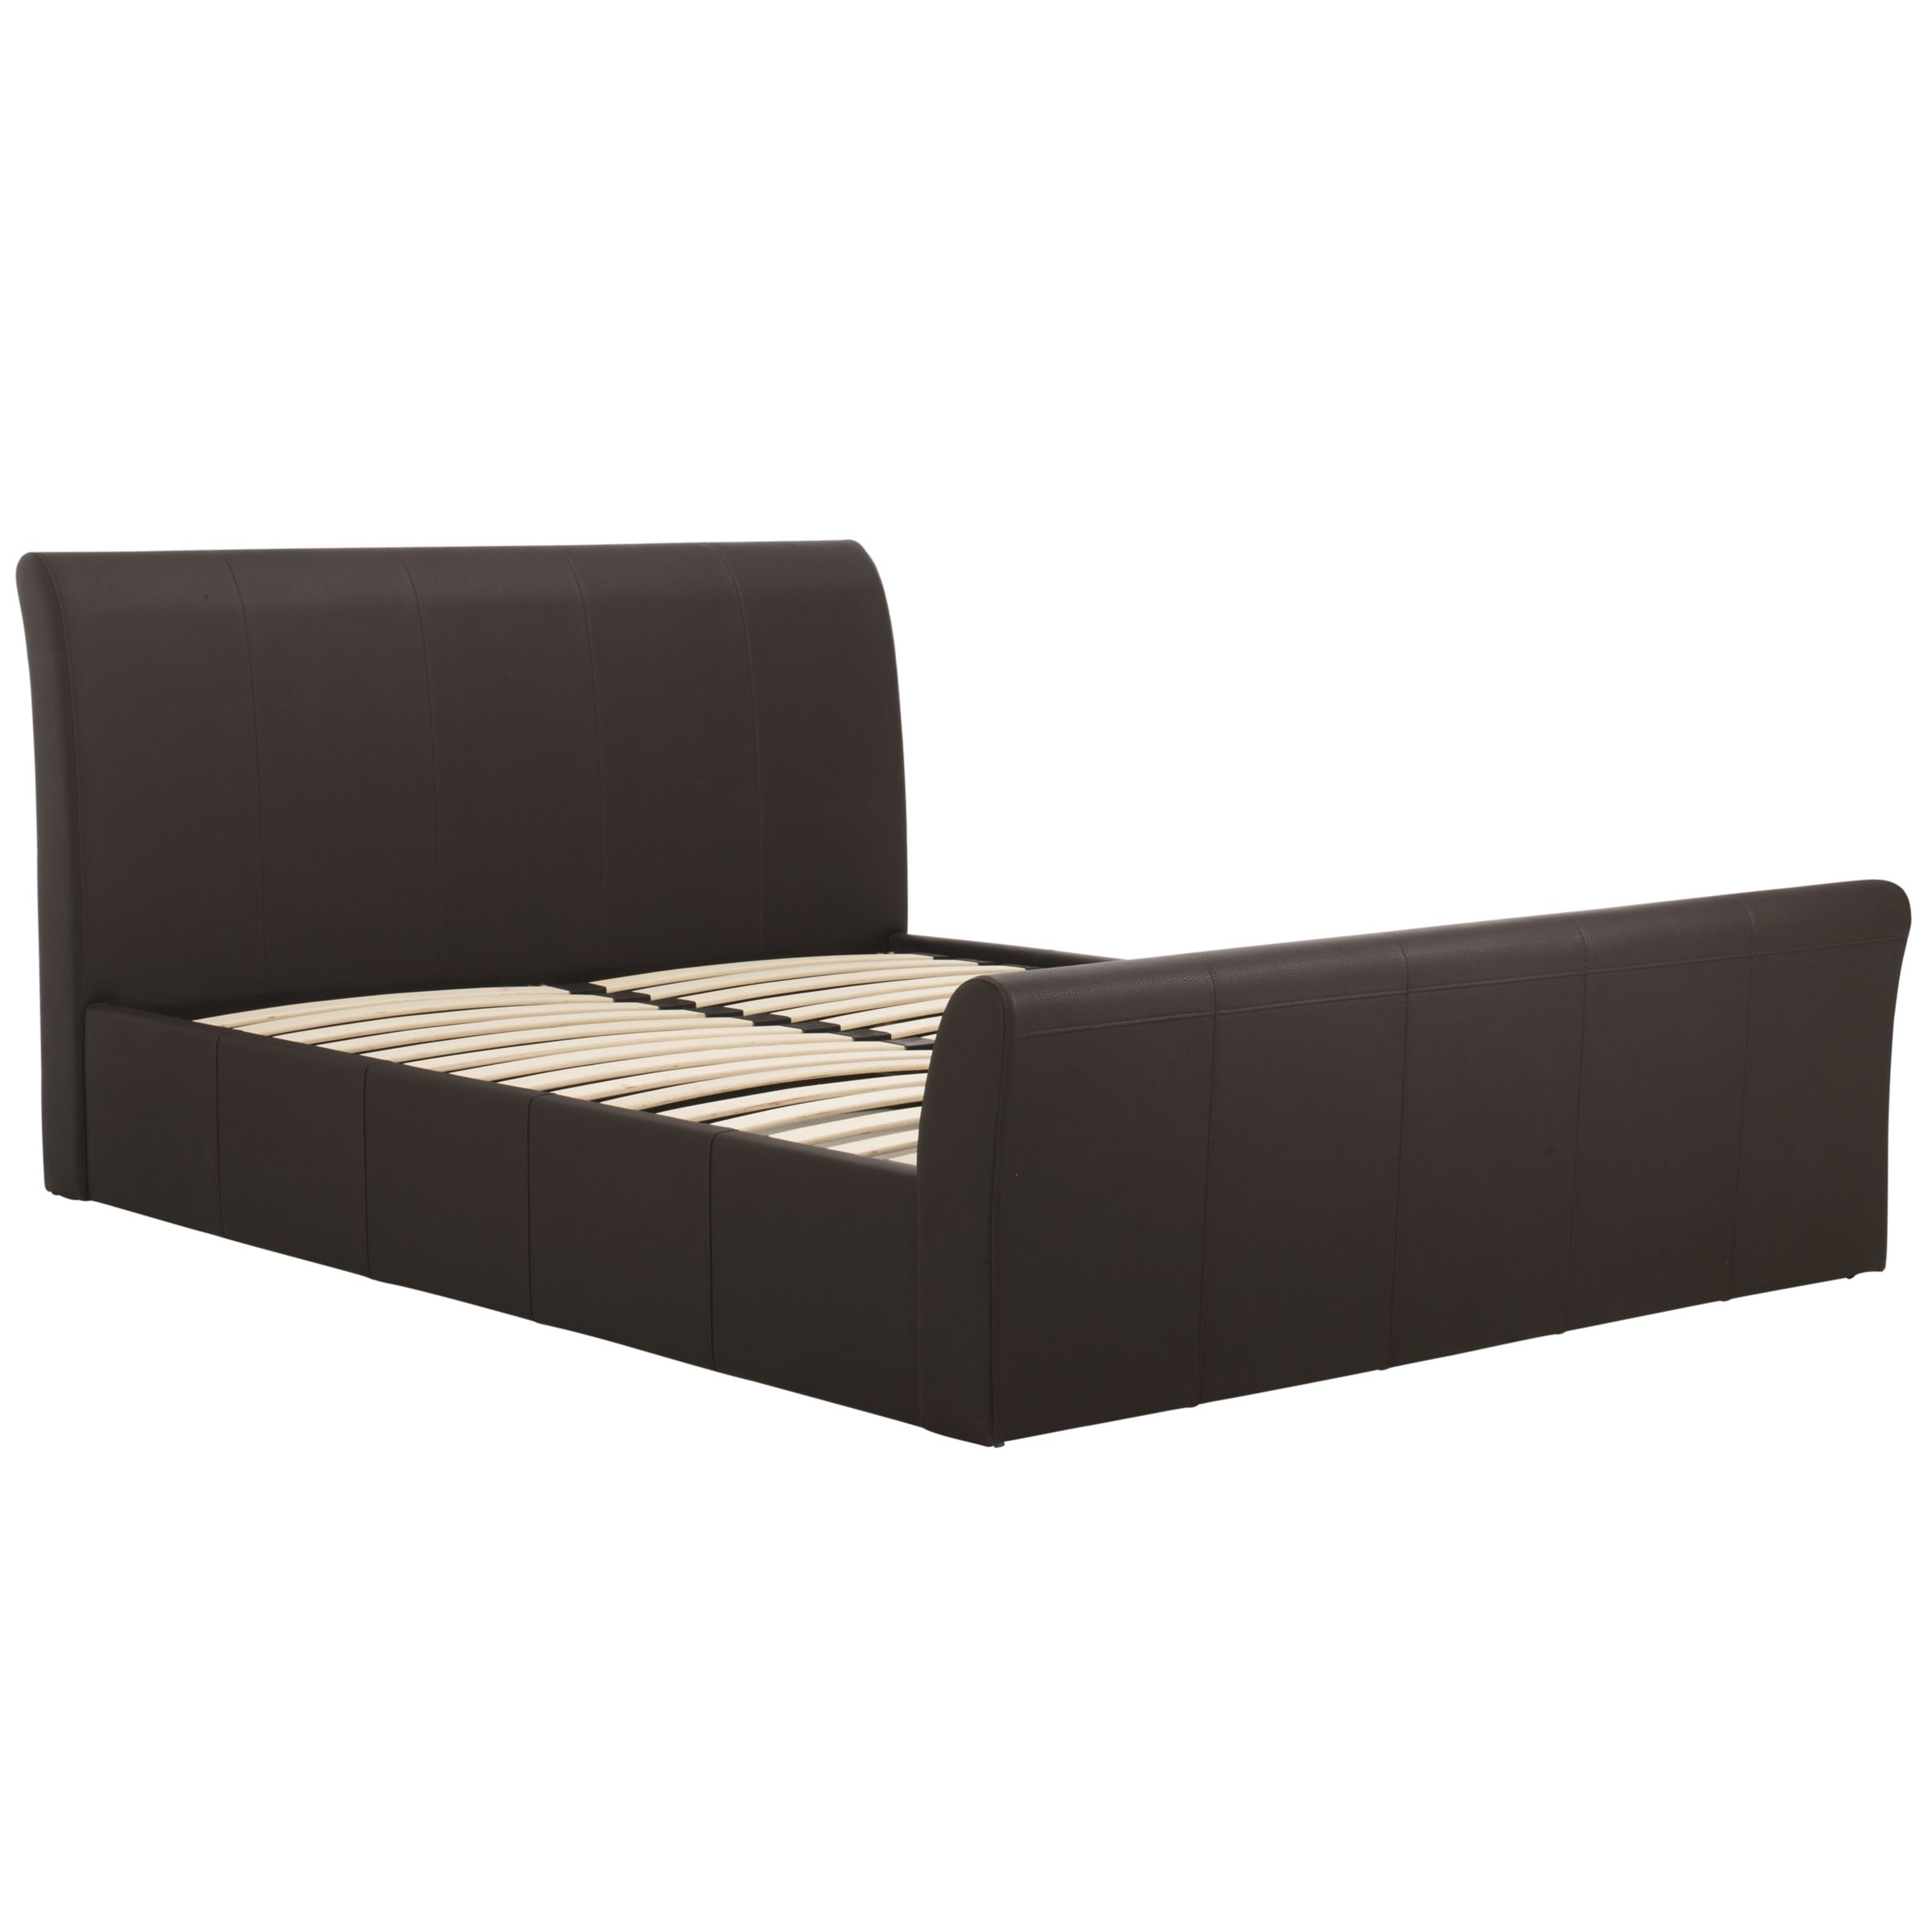 Chatham Bedstead, Chocolate, Super